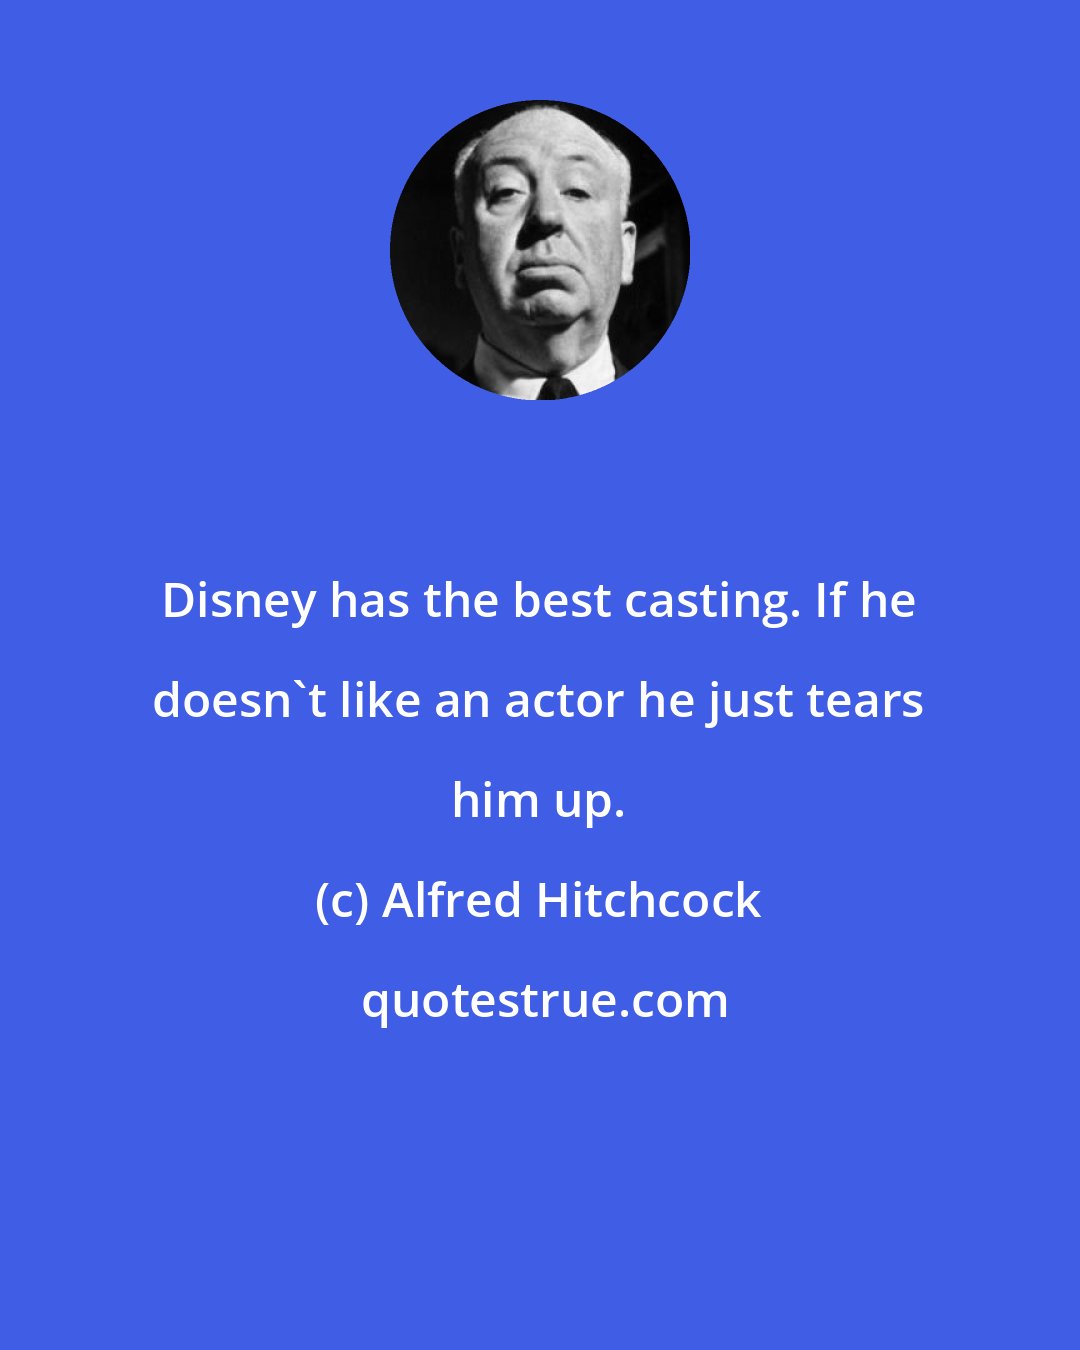 Alfred Hitchcock: Disney has the best casting. If he doesn't like an actor he just tears him up.